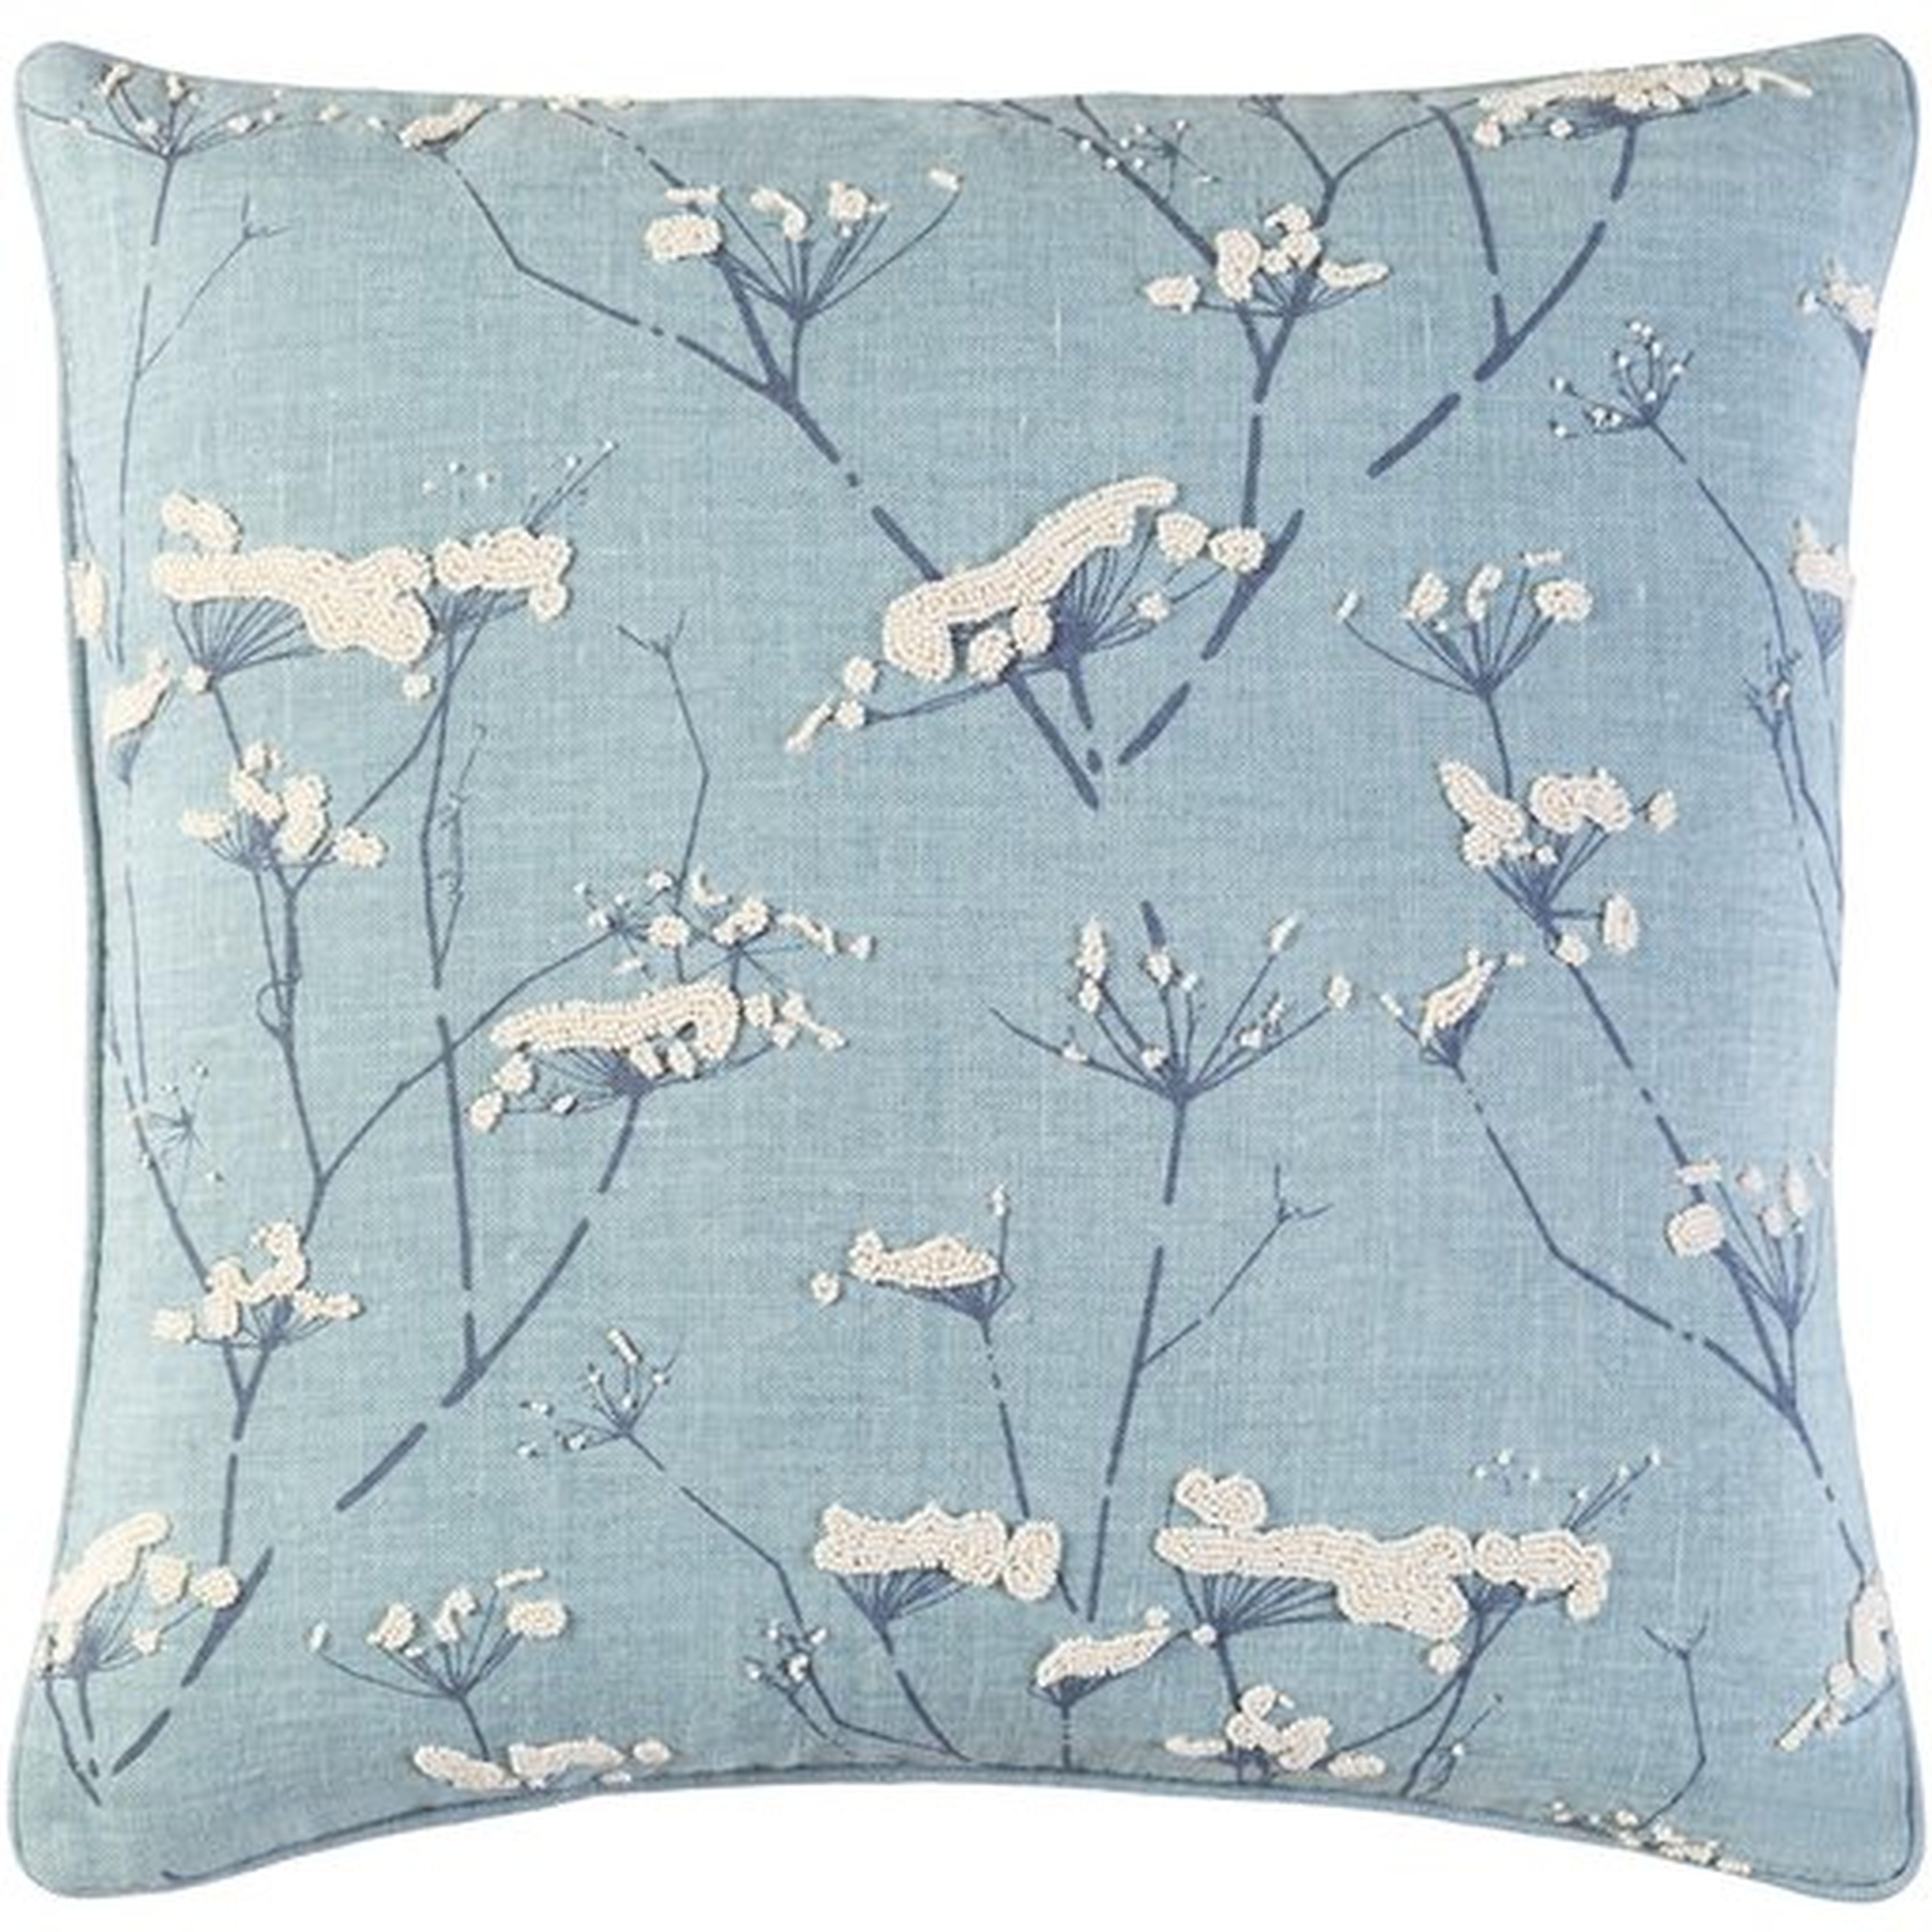 Enchanted Throw Pillow, 18" x 18", pillow cover only - Surya